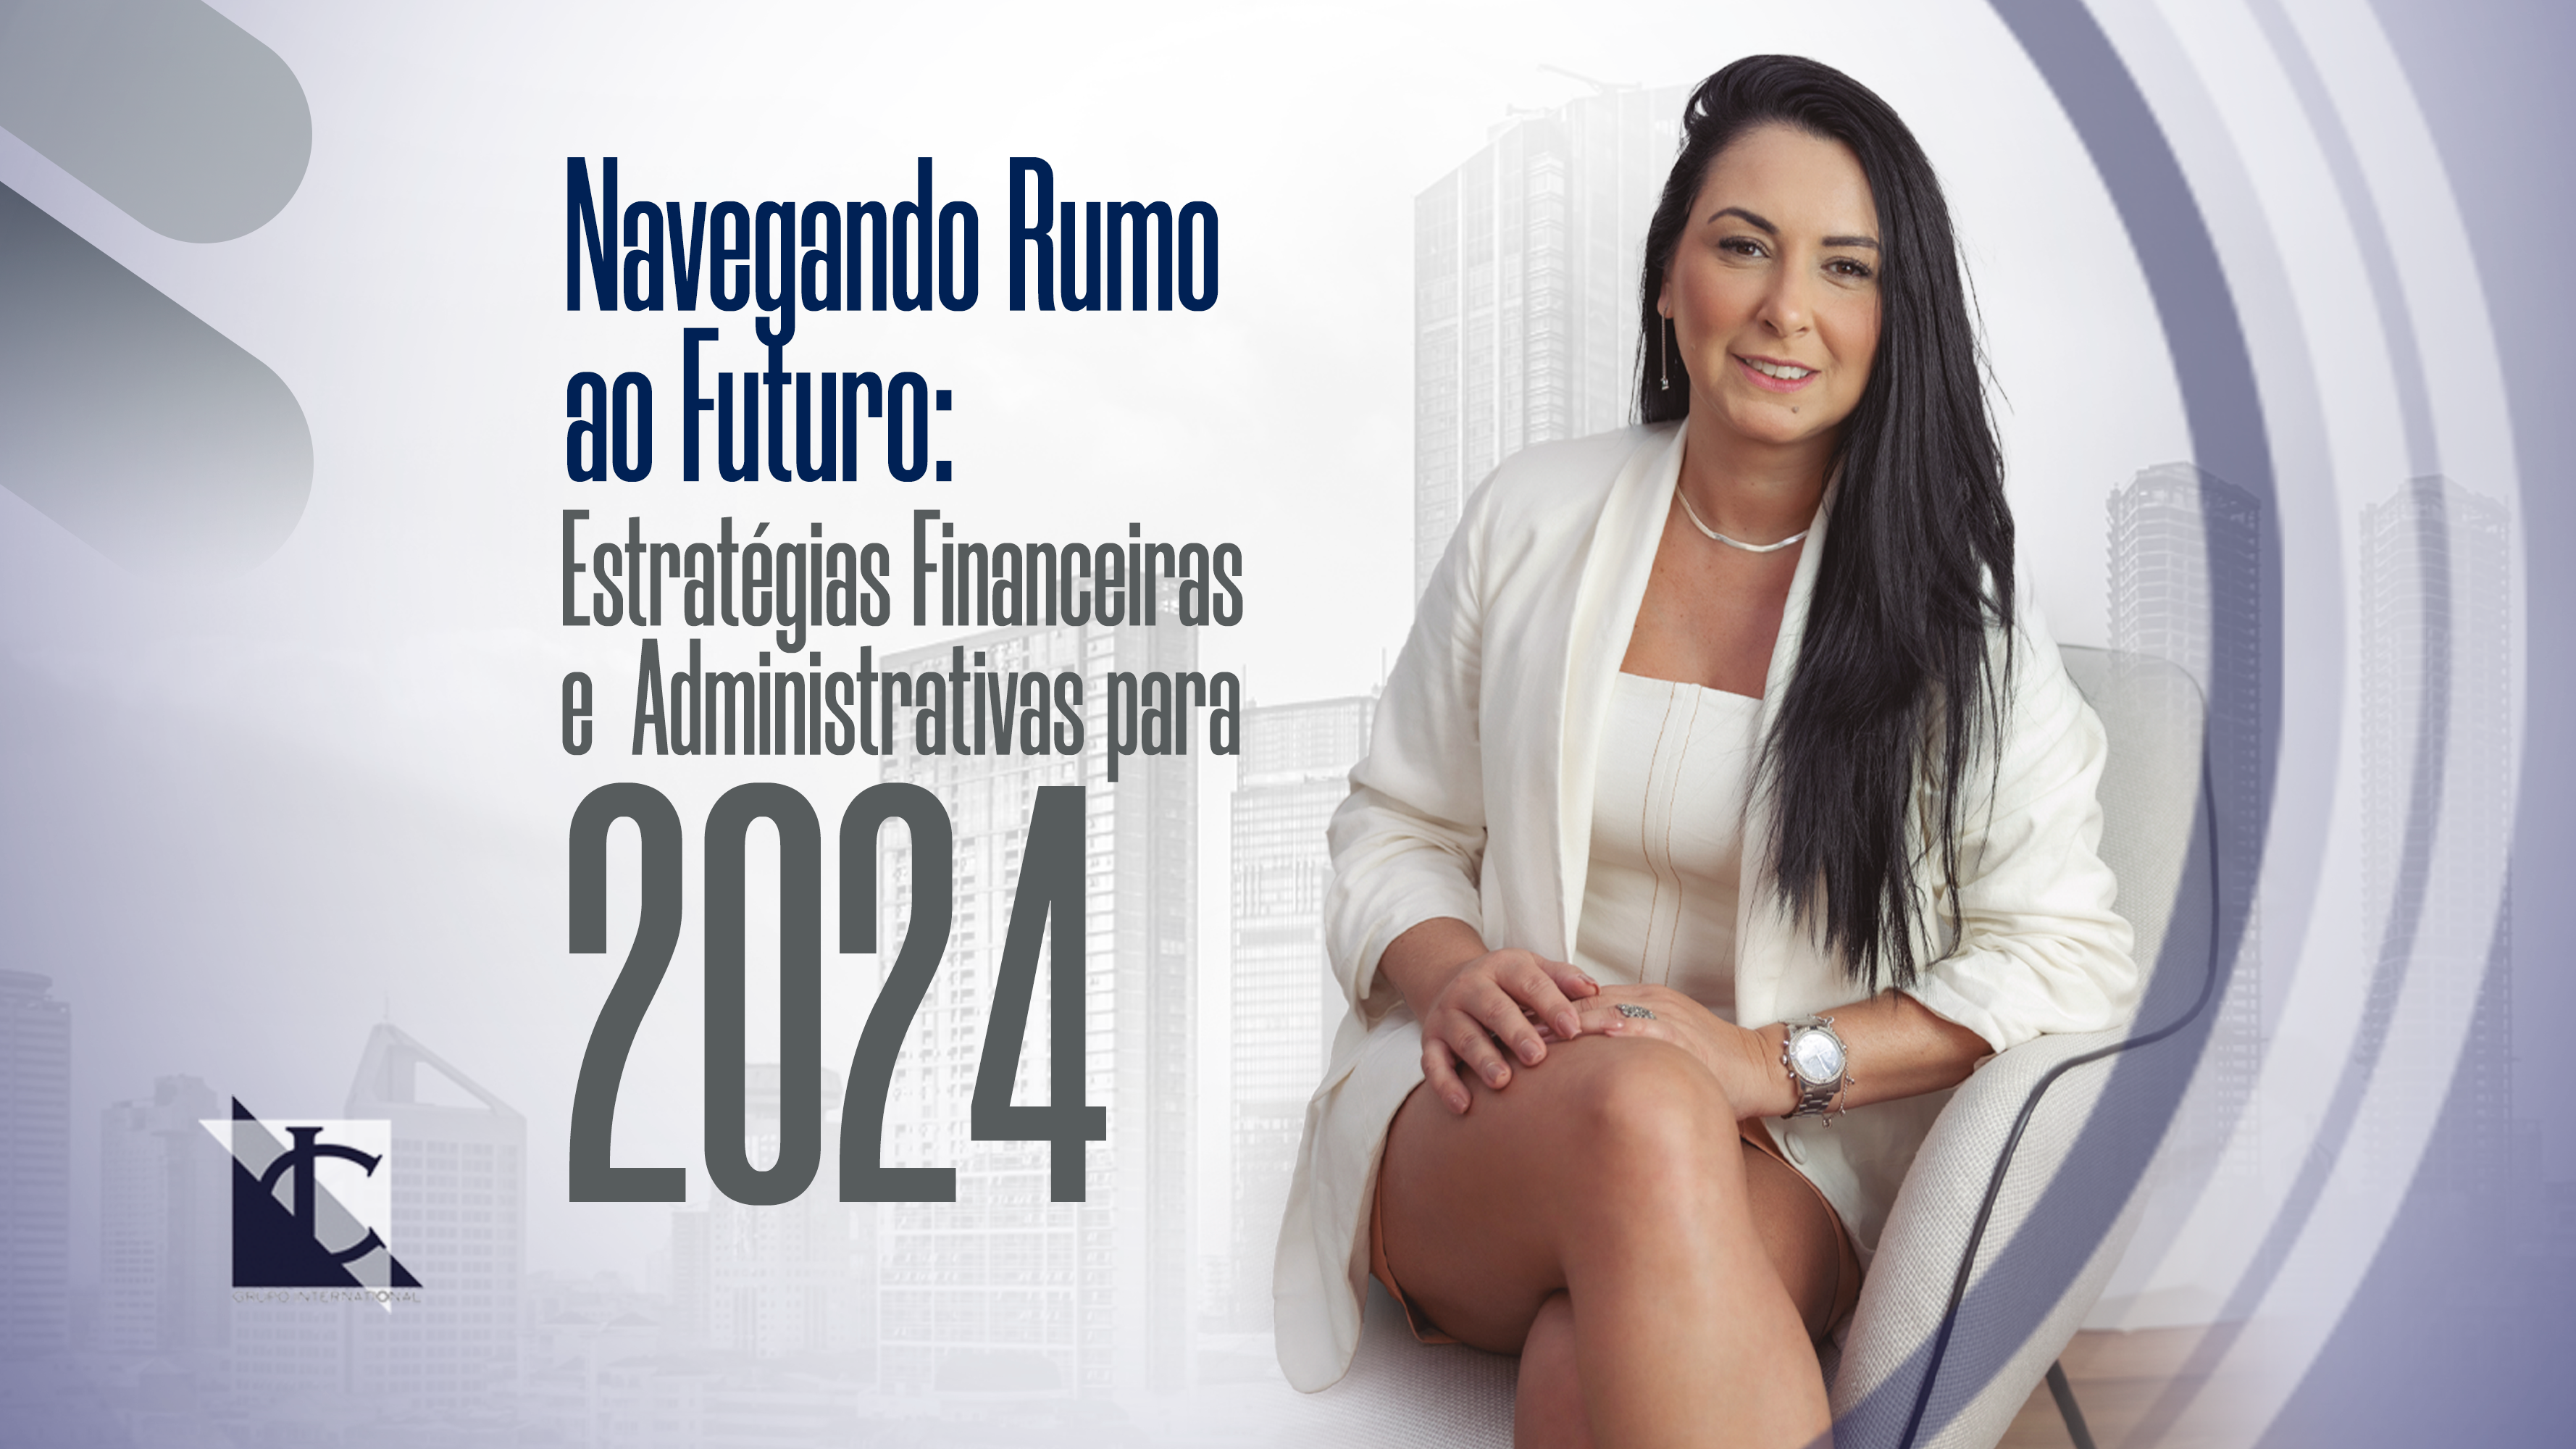 Read more about Navigating Towards the Future: Financial and Administrative Strategies for 2024